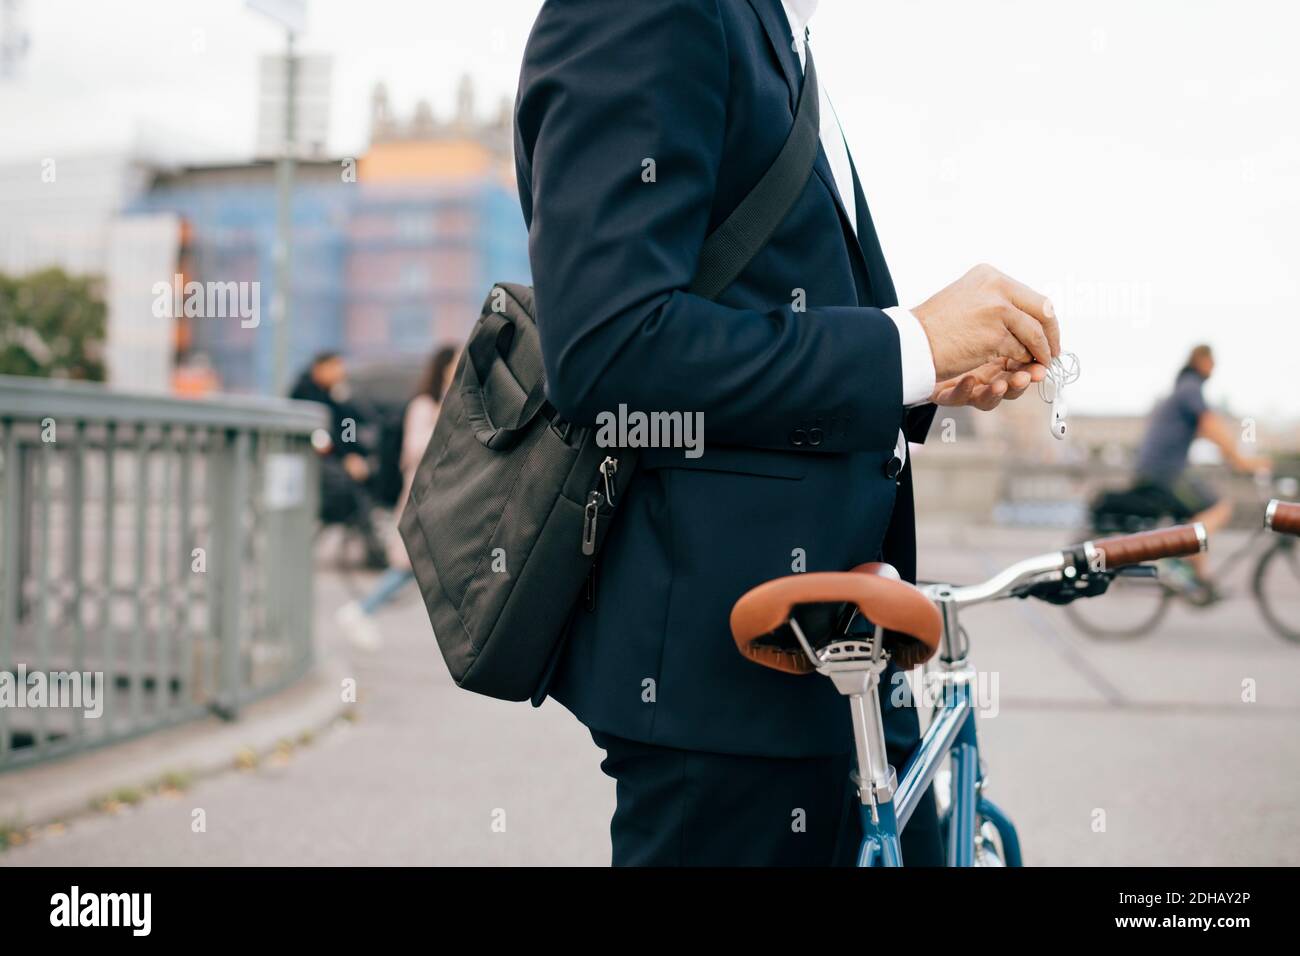 Midsection of businessman holding in-ear headphones while standing with bicycle on bridge in city Stock Photo